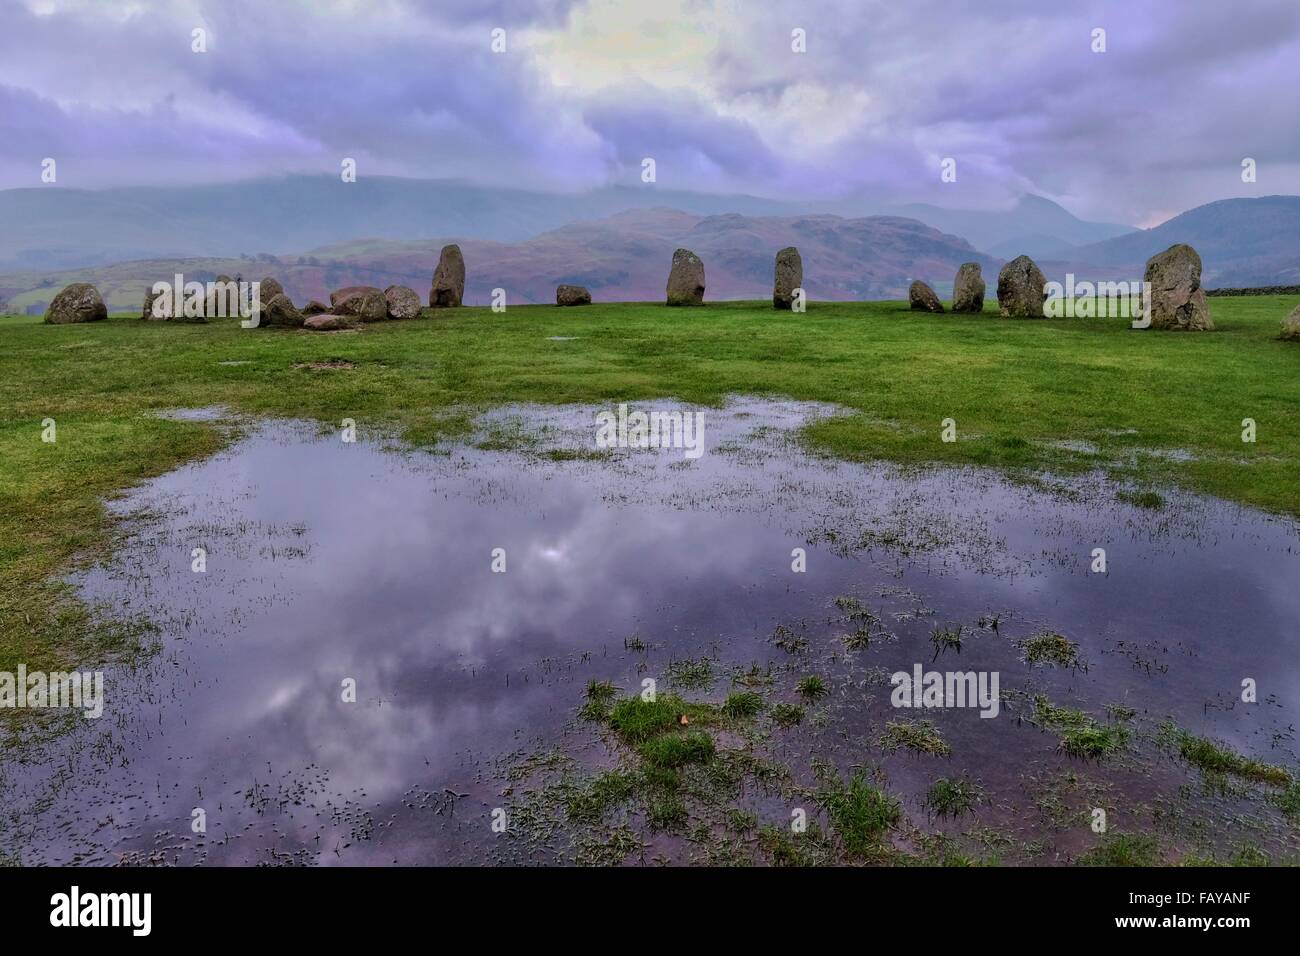 Castlerigg Stone Circle, Keswick, Cumbria, UK. 6 January 2016. Heavy skies and waterlogged ground mark the start of the day at Castlerigg Stone Circle. The site described by archaeologist John Waterhouse as 'one of the most visually impressive prehistoric monuments in Britain' sits above the Keswick where flooding is still expected. Credit:  Tom Corban/Alamy Live News Stock Photo